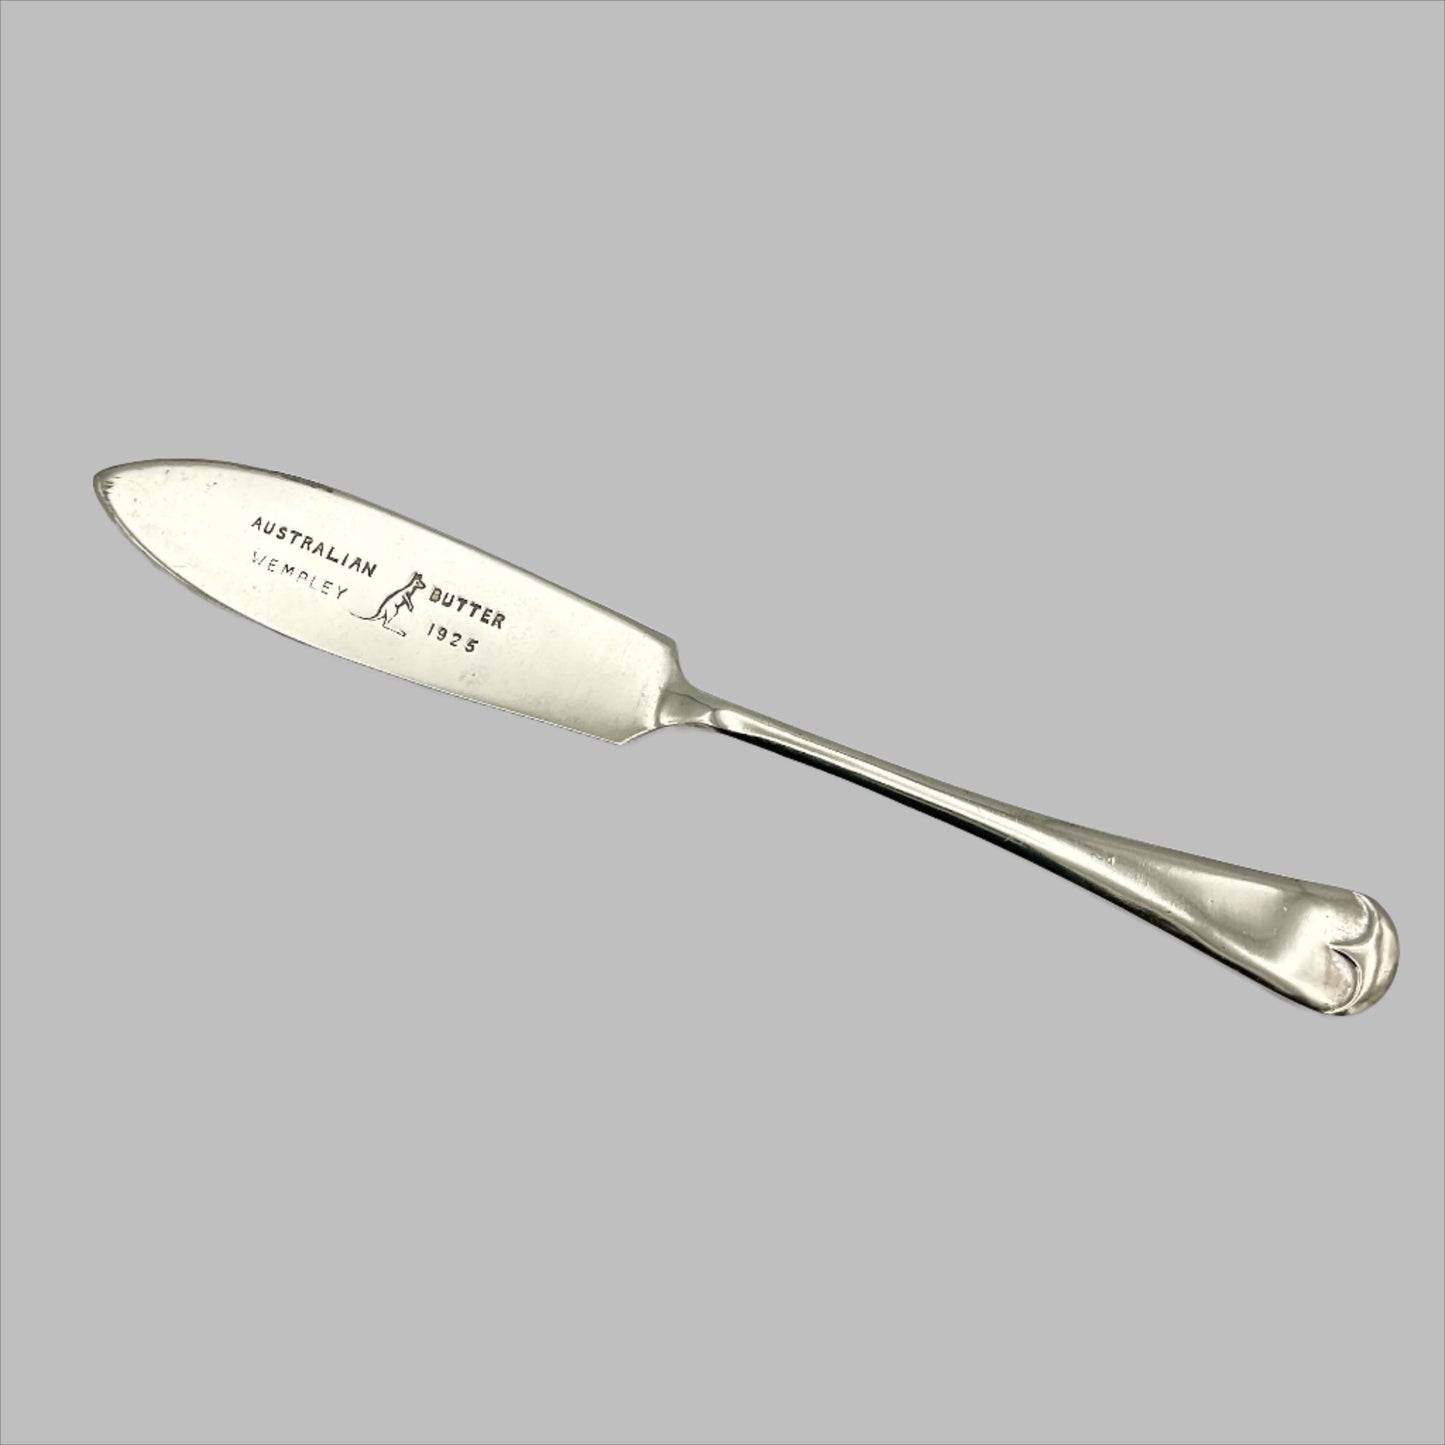 Silver plated butter knife with Australian Butter Wembley 1925 on the blade with a Kangaroo emblem on a white background